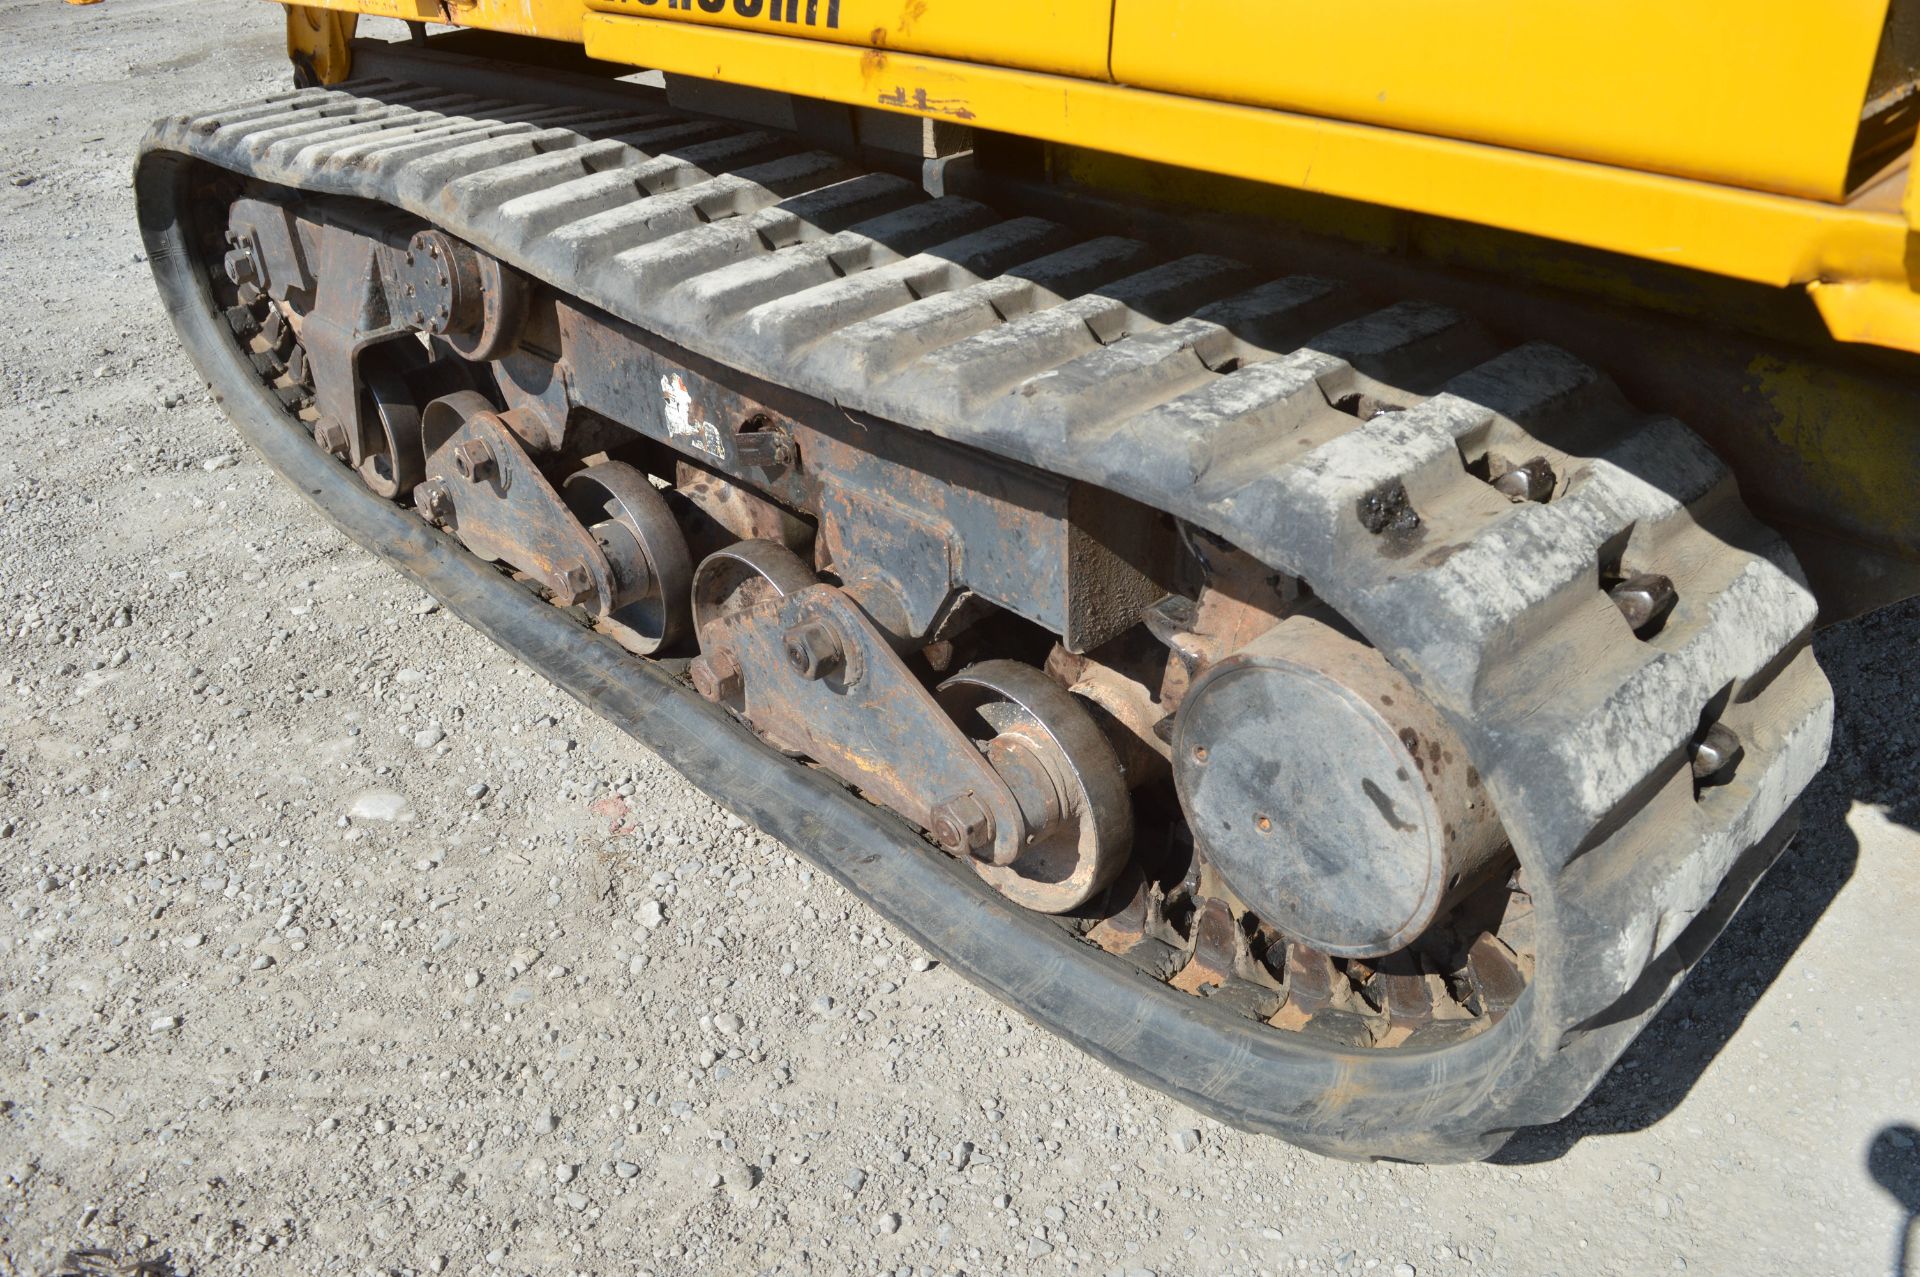 Morooka MST-300 VD rubber tracked straight skip dumper  S/N: 3320 Year: 2001 Recorded hours: 1408 - Image 6 of 9